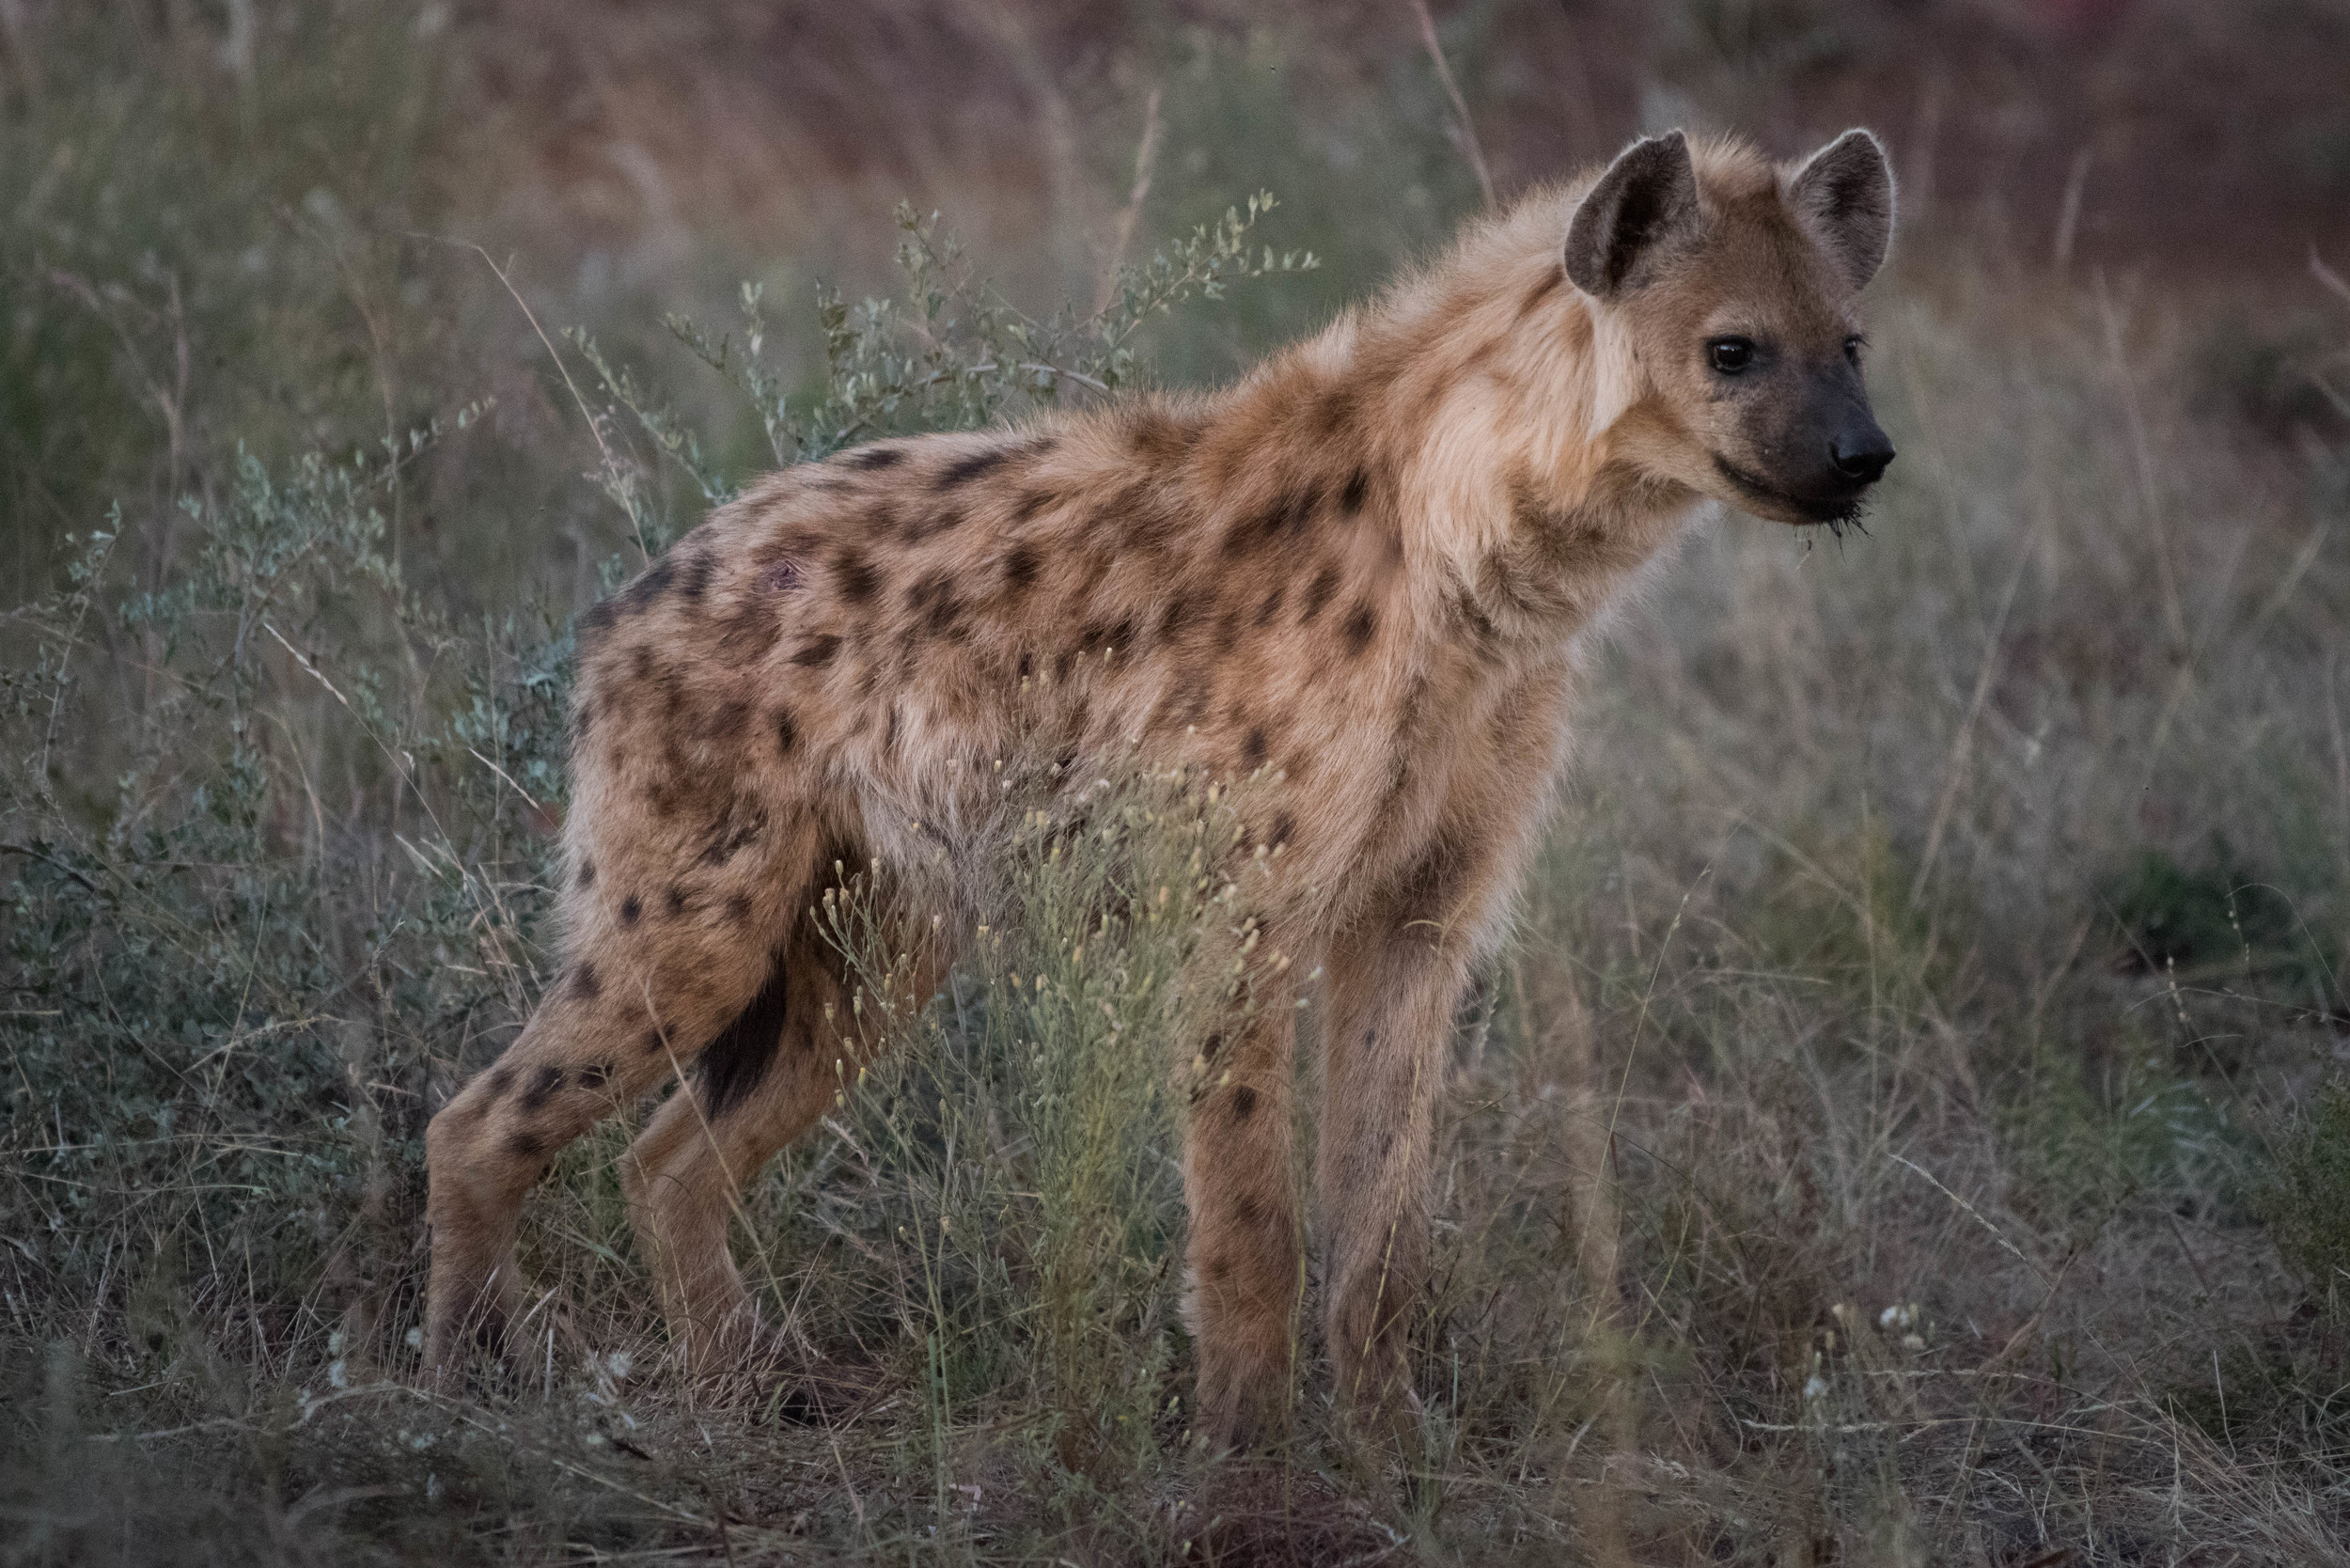 Spotted hyena, Madikwe Game Reserve, South Africa